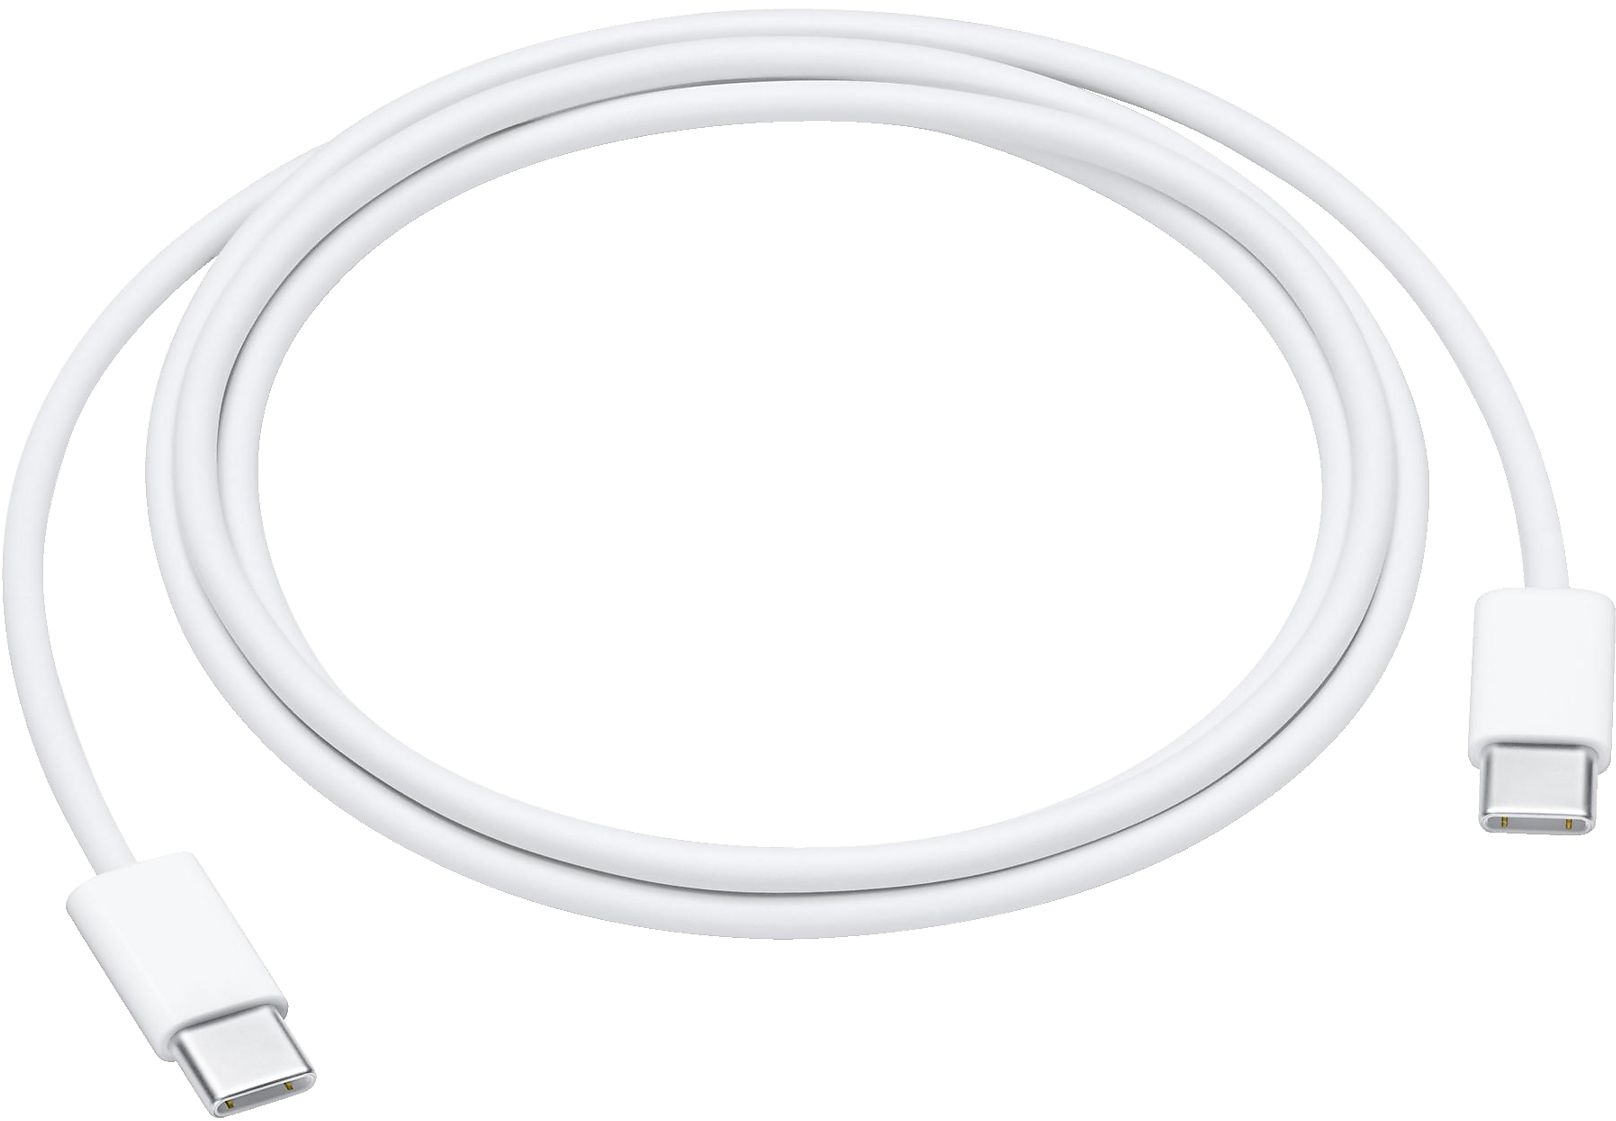 APPLE MM093ZM/A USB-C CHARGE CABLE, Ladekabel, 1 m, Weiß